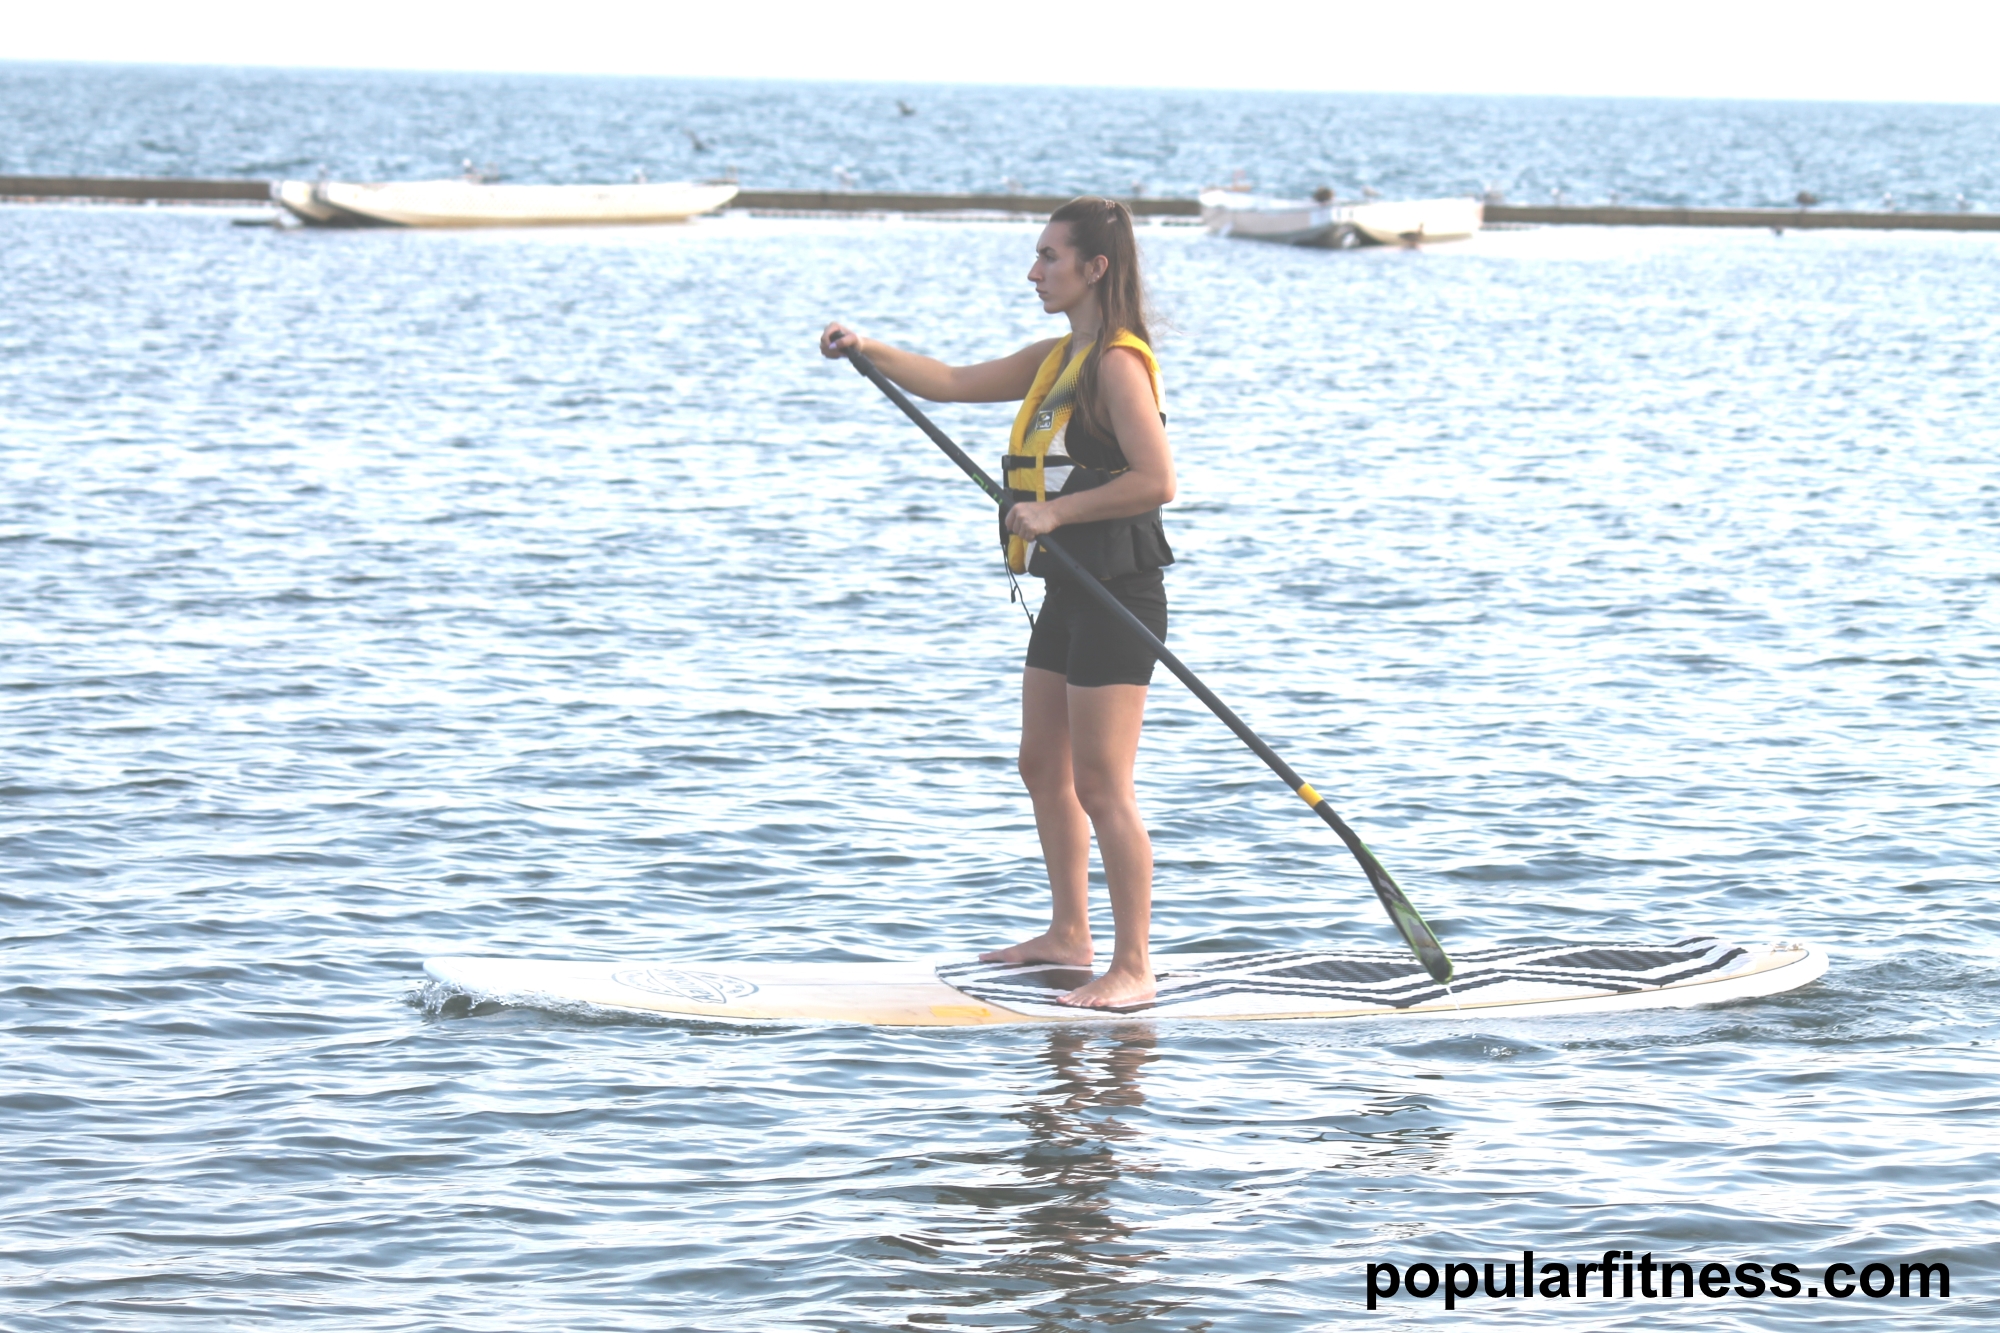 Paddle boarding on a paddleboard on the lake while standing up - photo by popular fitness